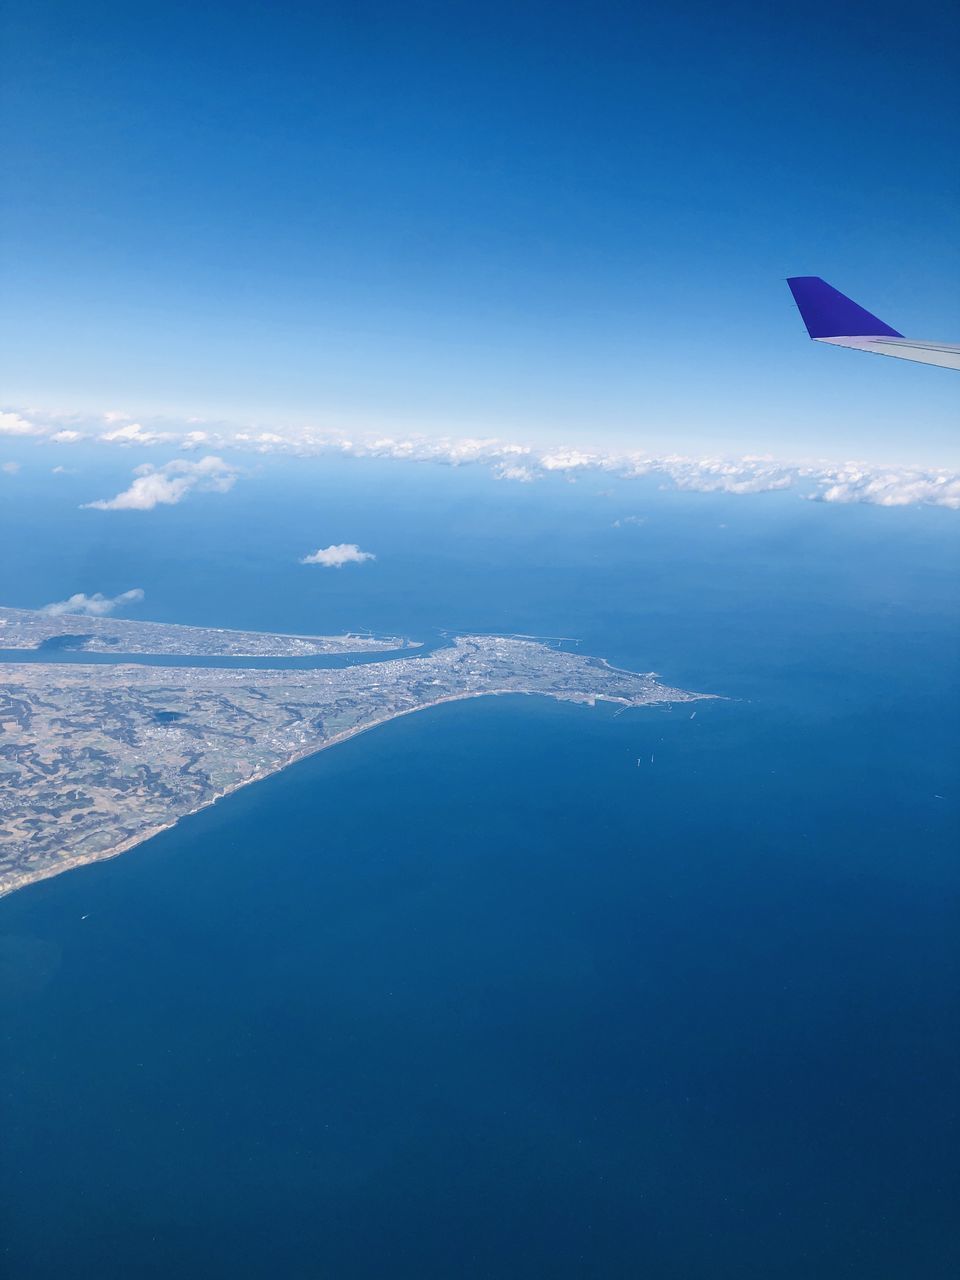 AERIAL VIEW OF SEA AND AIRPLANE AGAINST SKY